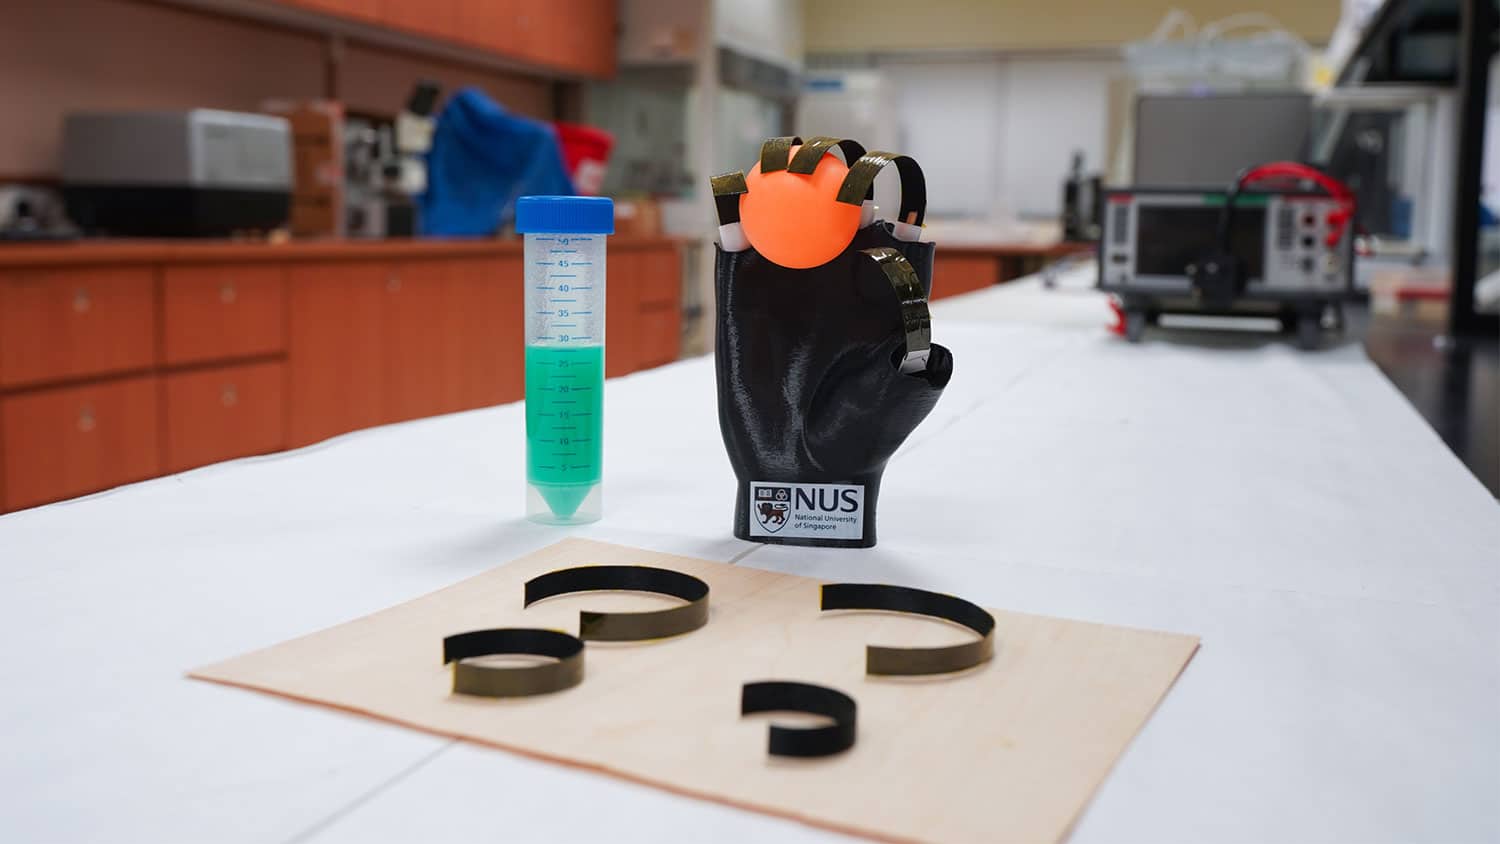 The wooden robotic gripper developed by NUS researchers can spontaneously stretch and bend itself in response to moisture, thermal and light stimulation.